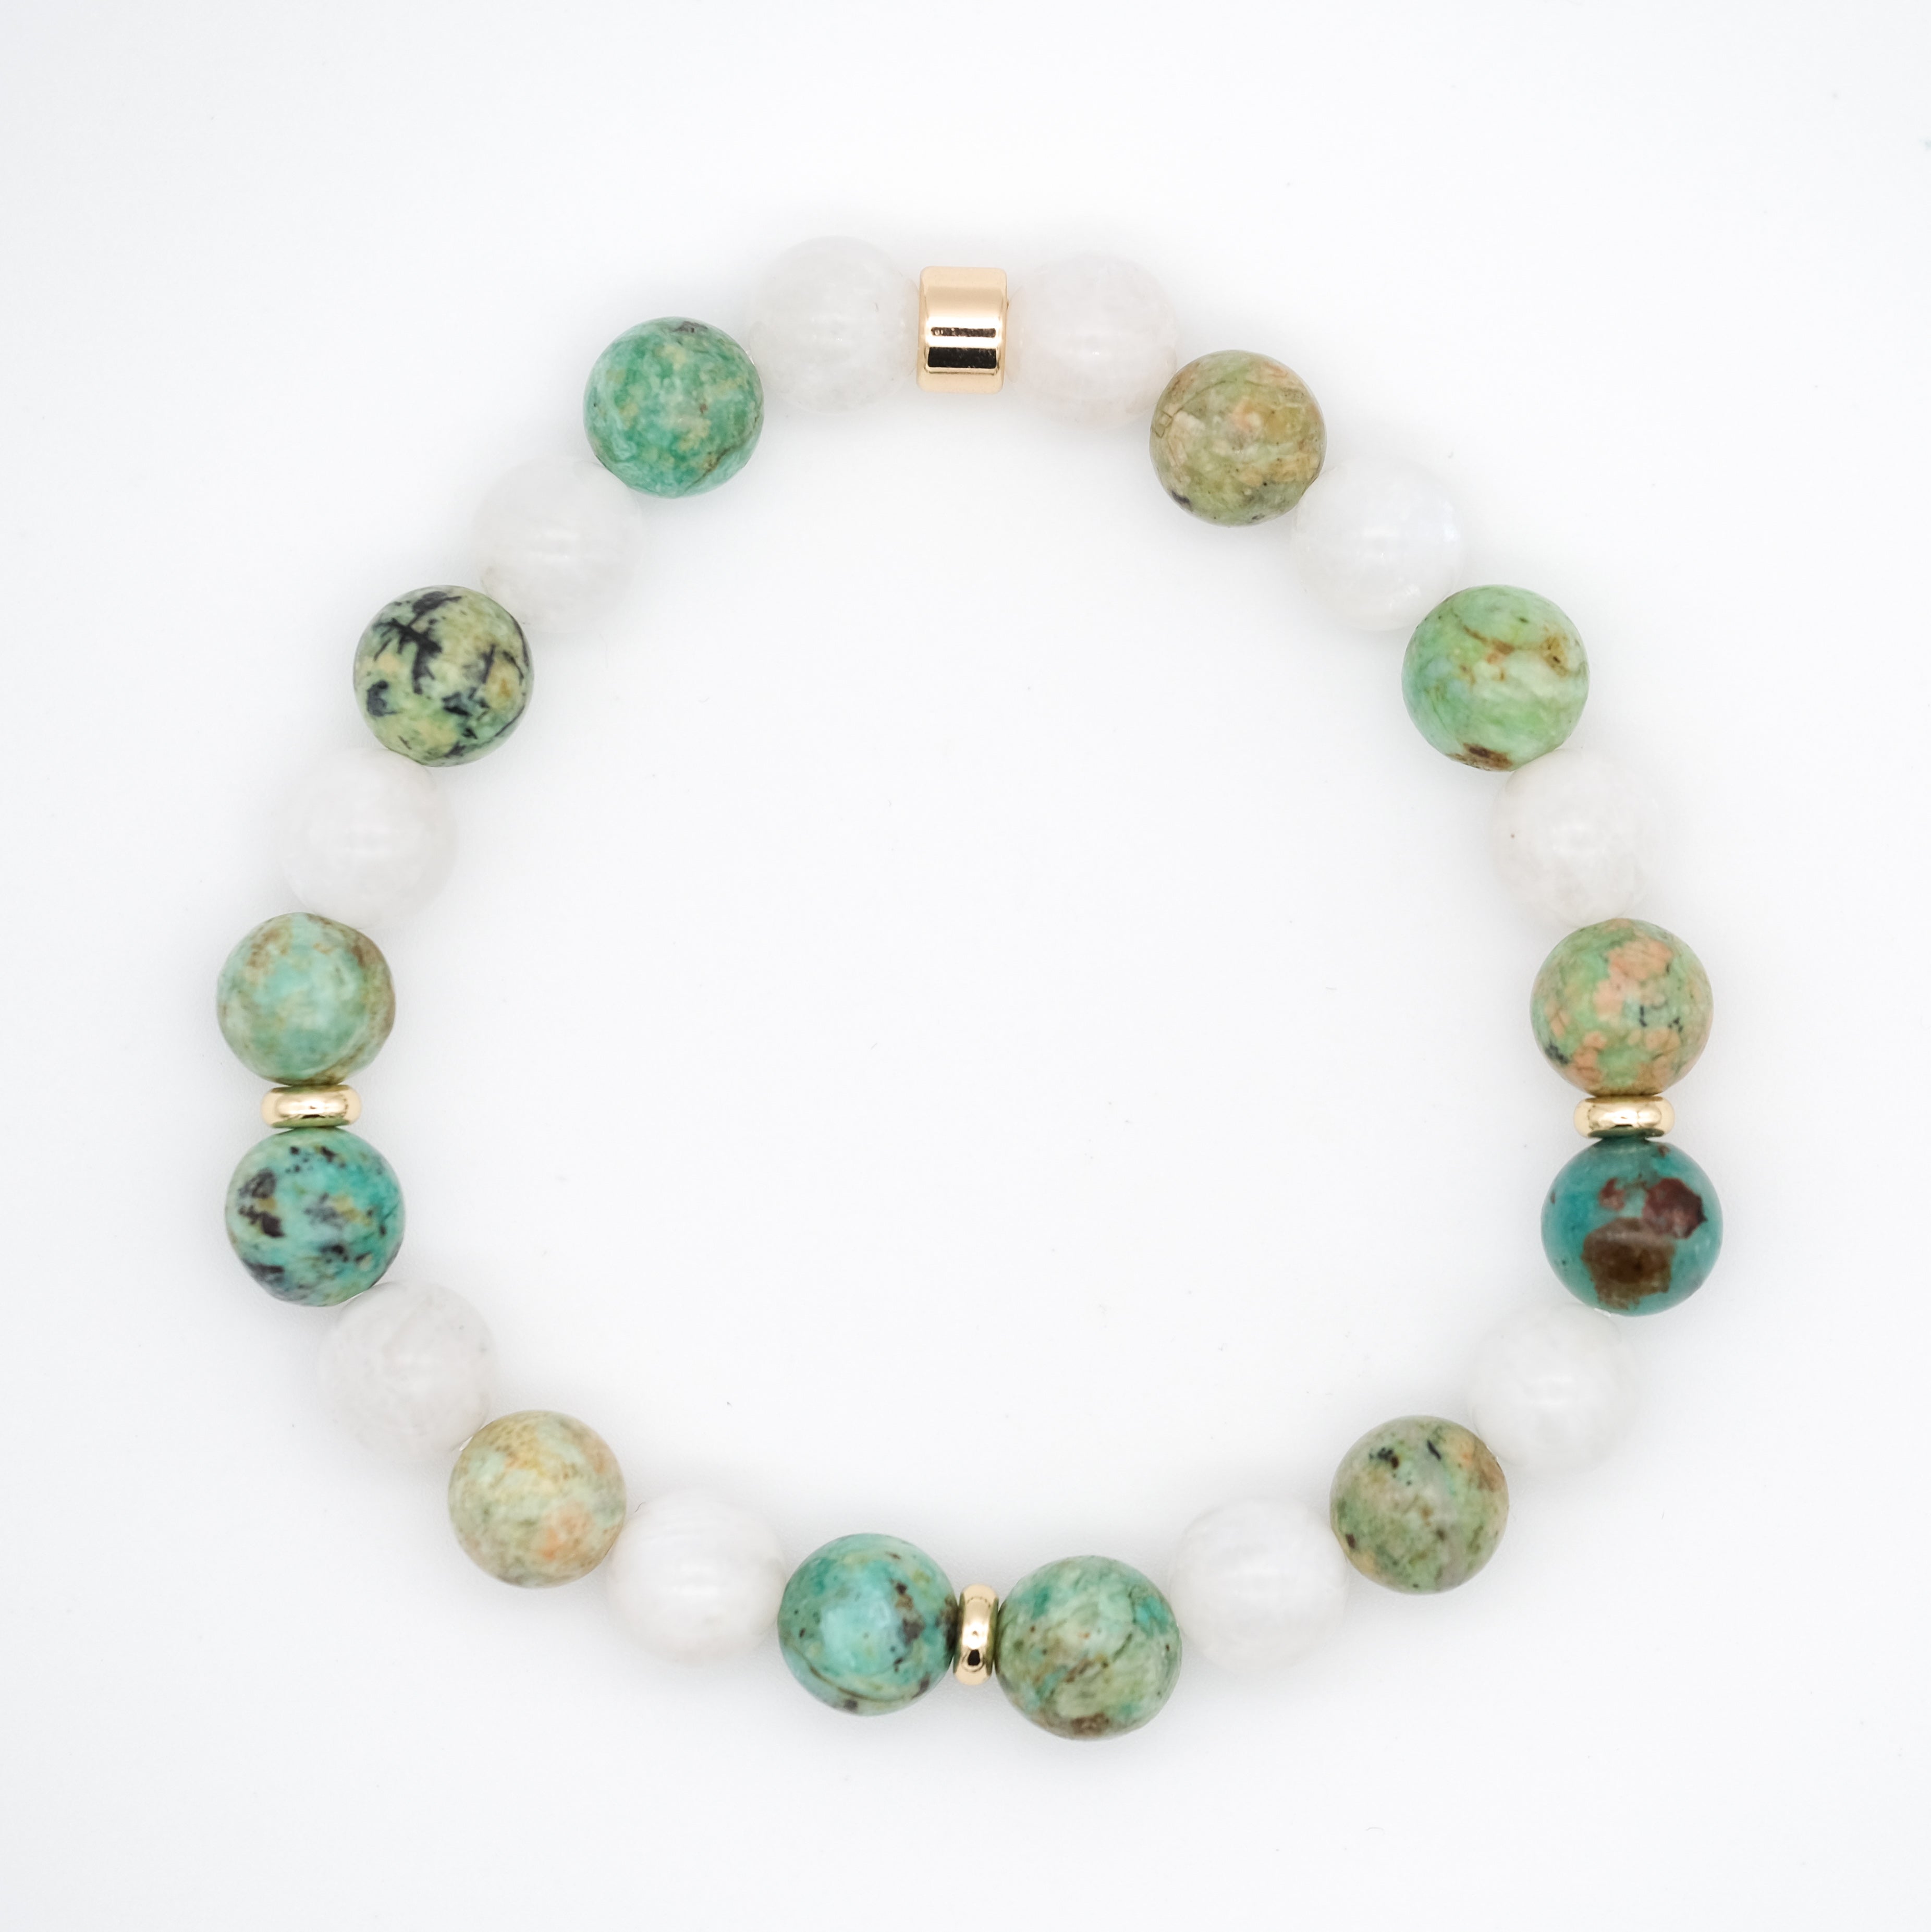 A moonstone and chrysocolla gemstone bracelet with gold accessories from above